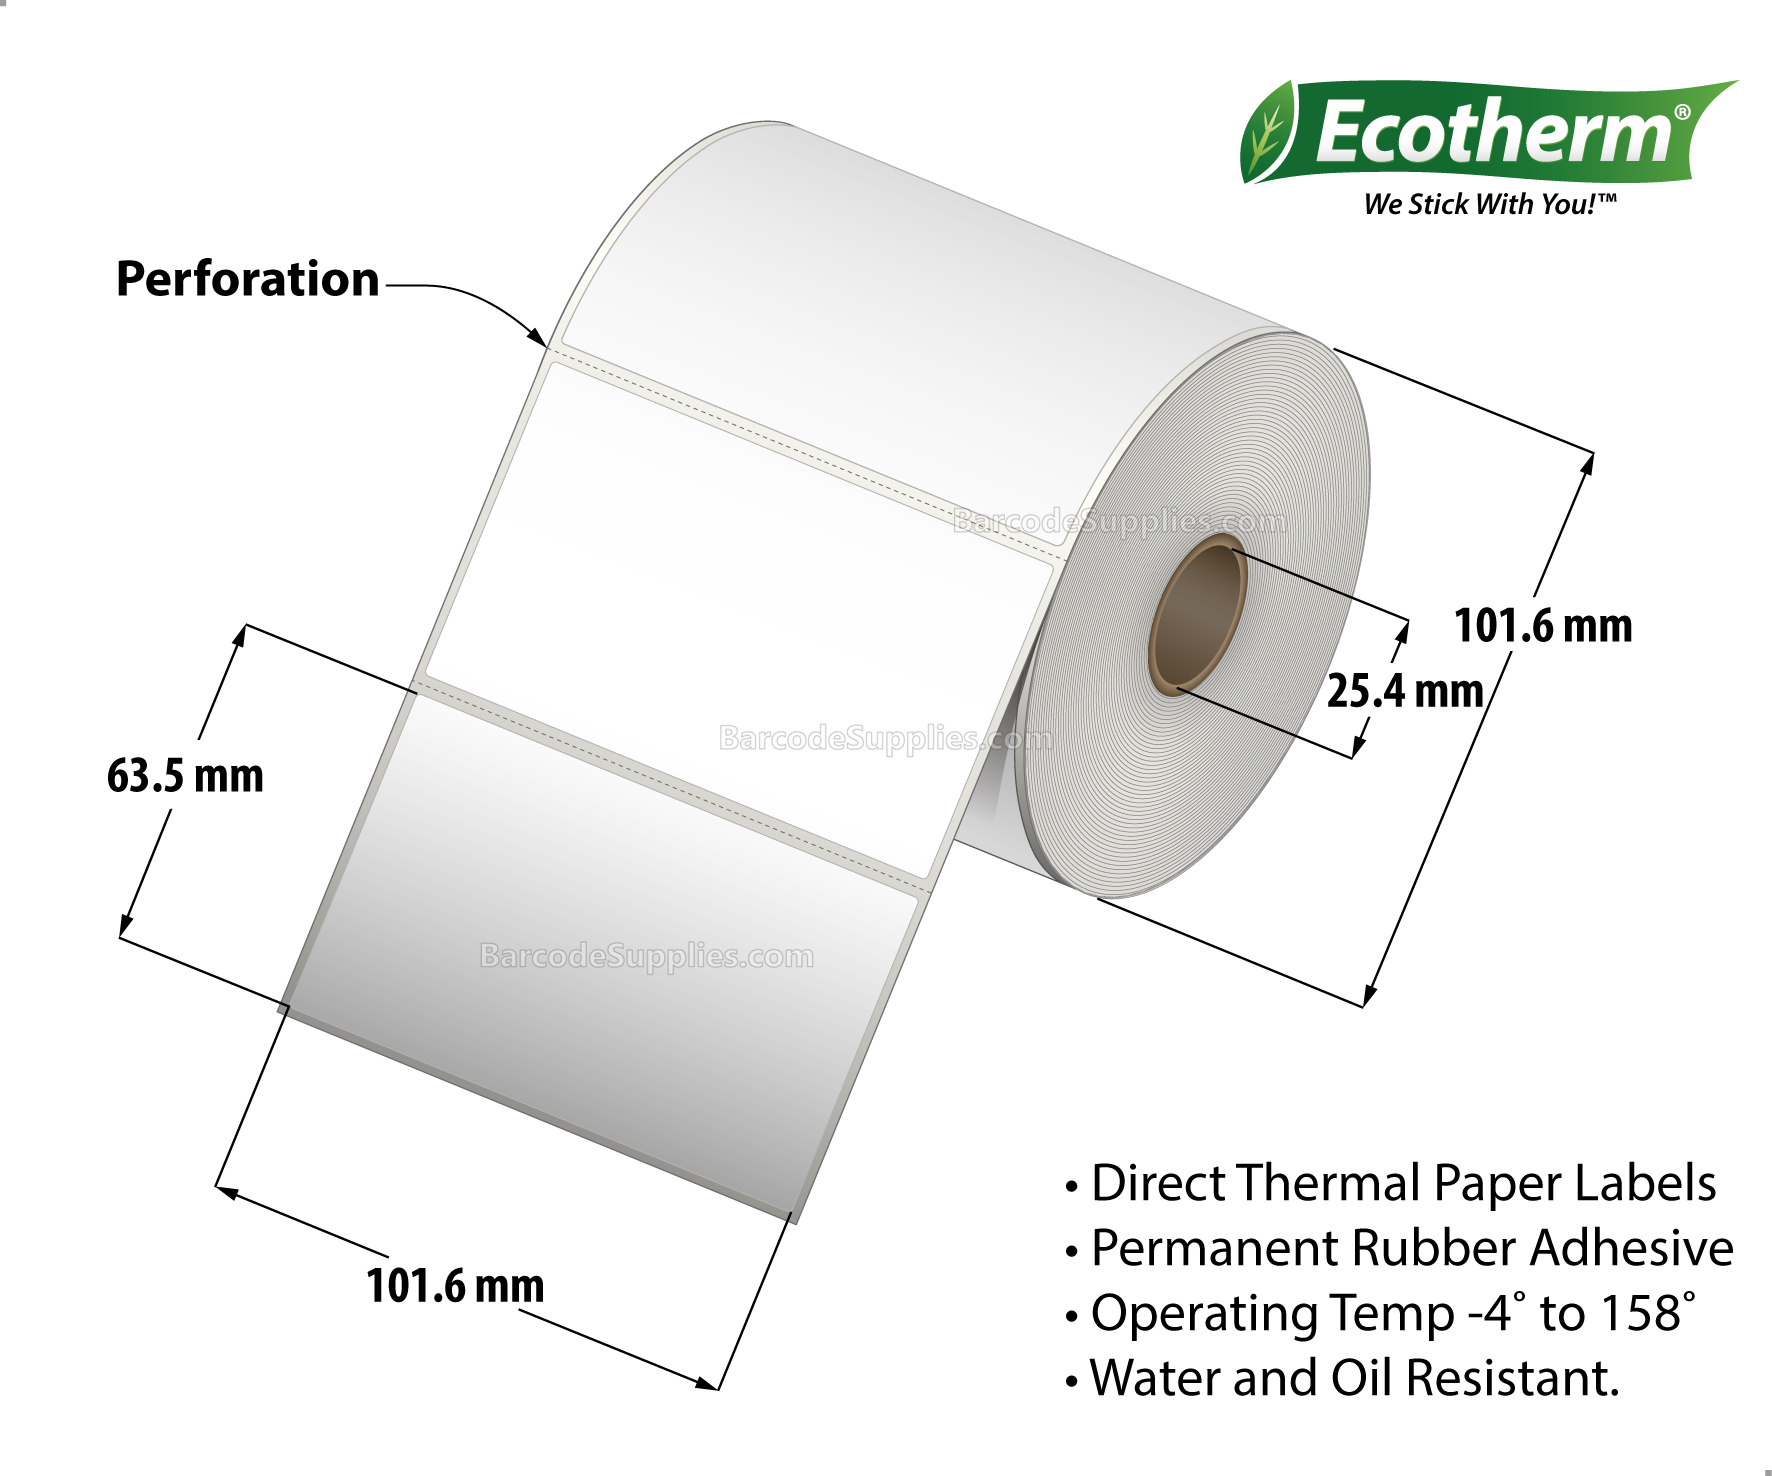 Products 4 x 2.5 Direct Thermal White Labels With Rubber Adhesive - Perforated - 600 Labels Per Roll - Carton Of 4 Rolls - 2400 Labels Total - MPN: ECOTHERM14113-4